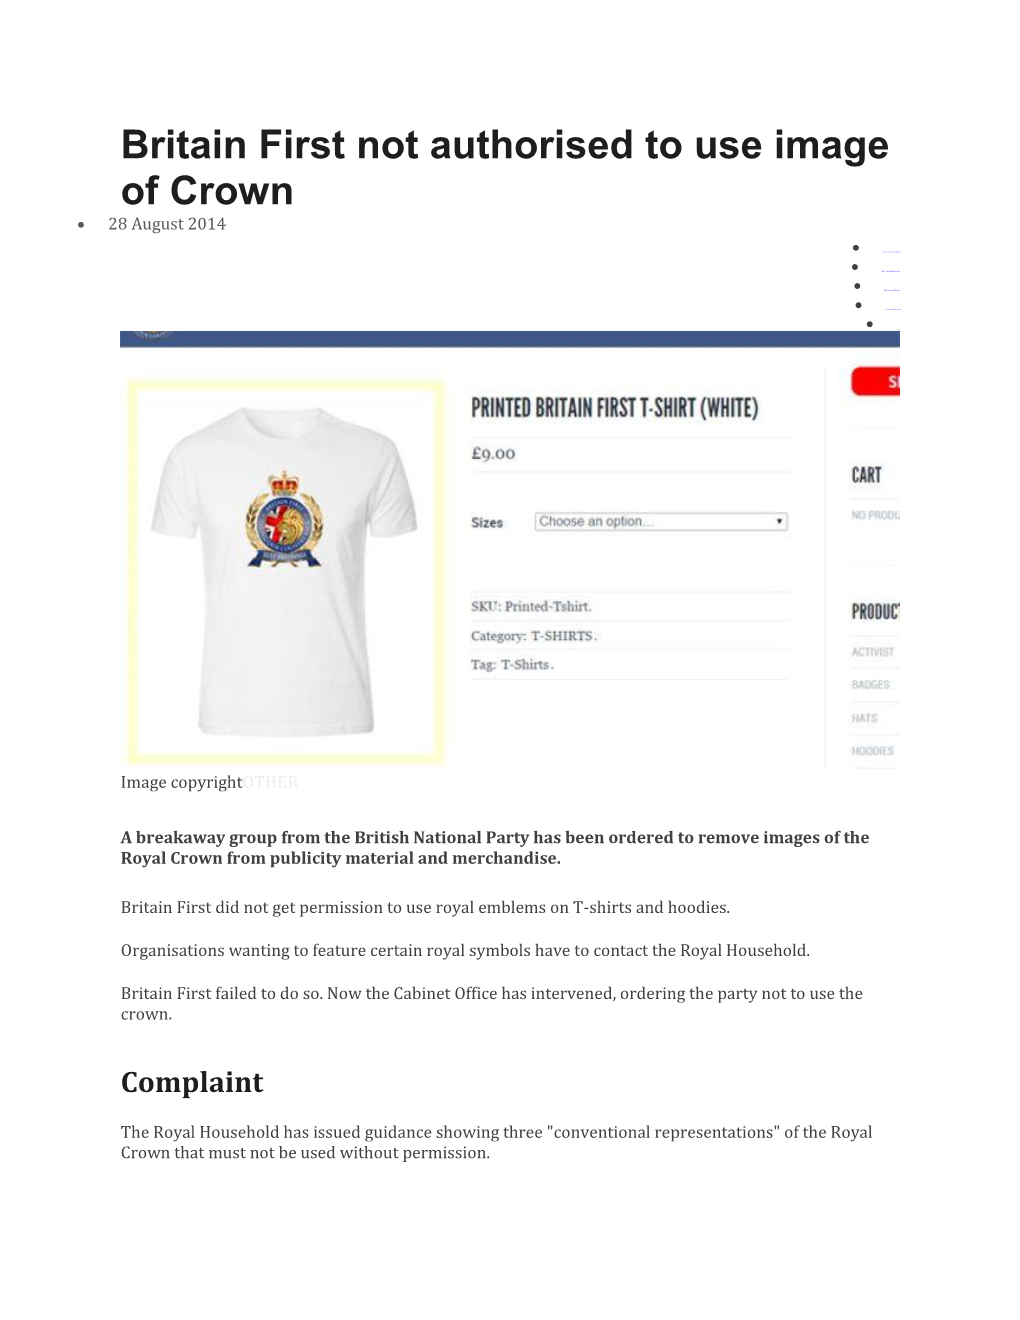 Britain First Not Authorised to Use Image of Crown • 28 August 2014